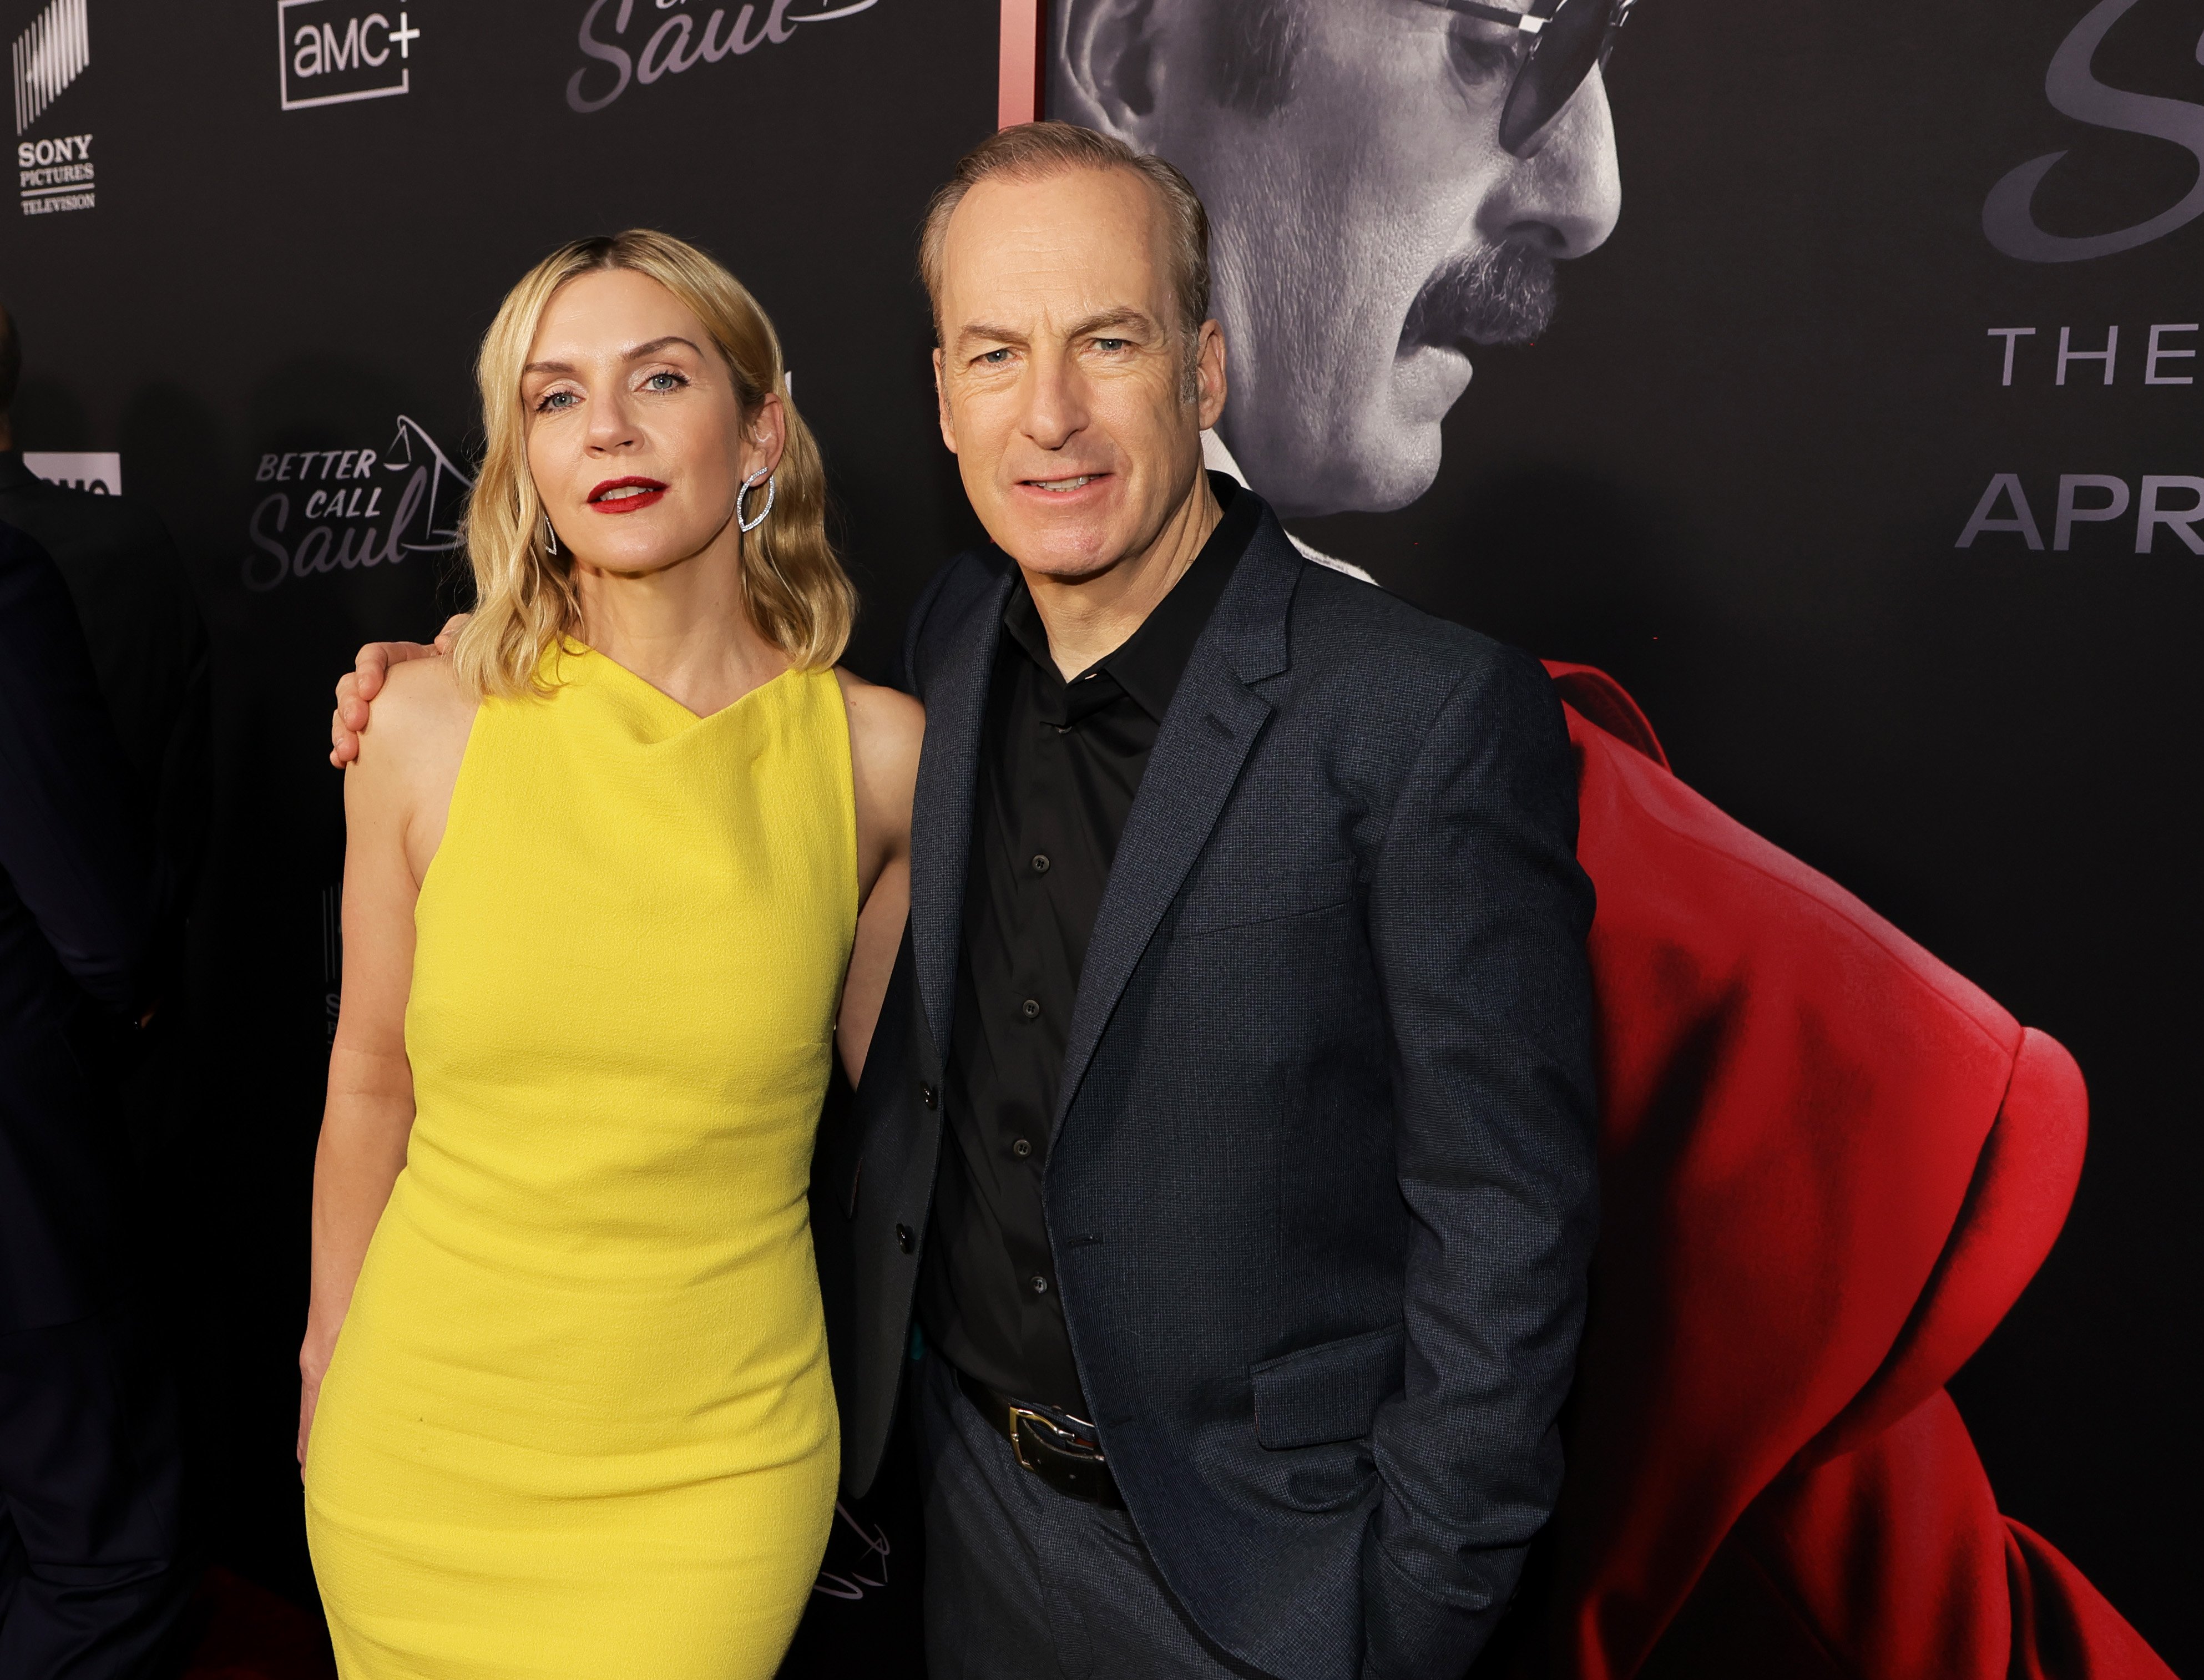 Rhea Seehorn and Bob Odenkirk pose together at the 'Better Call Saul' Season 6 premiere